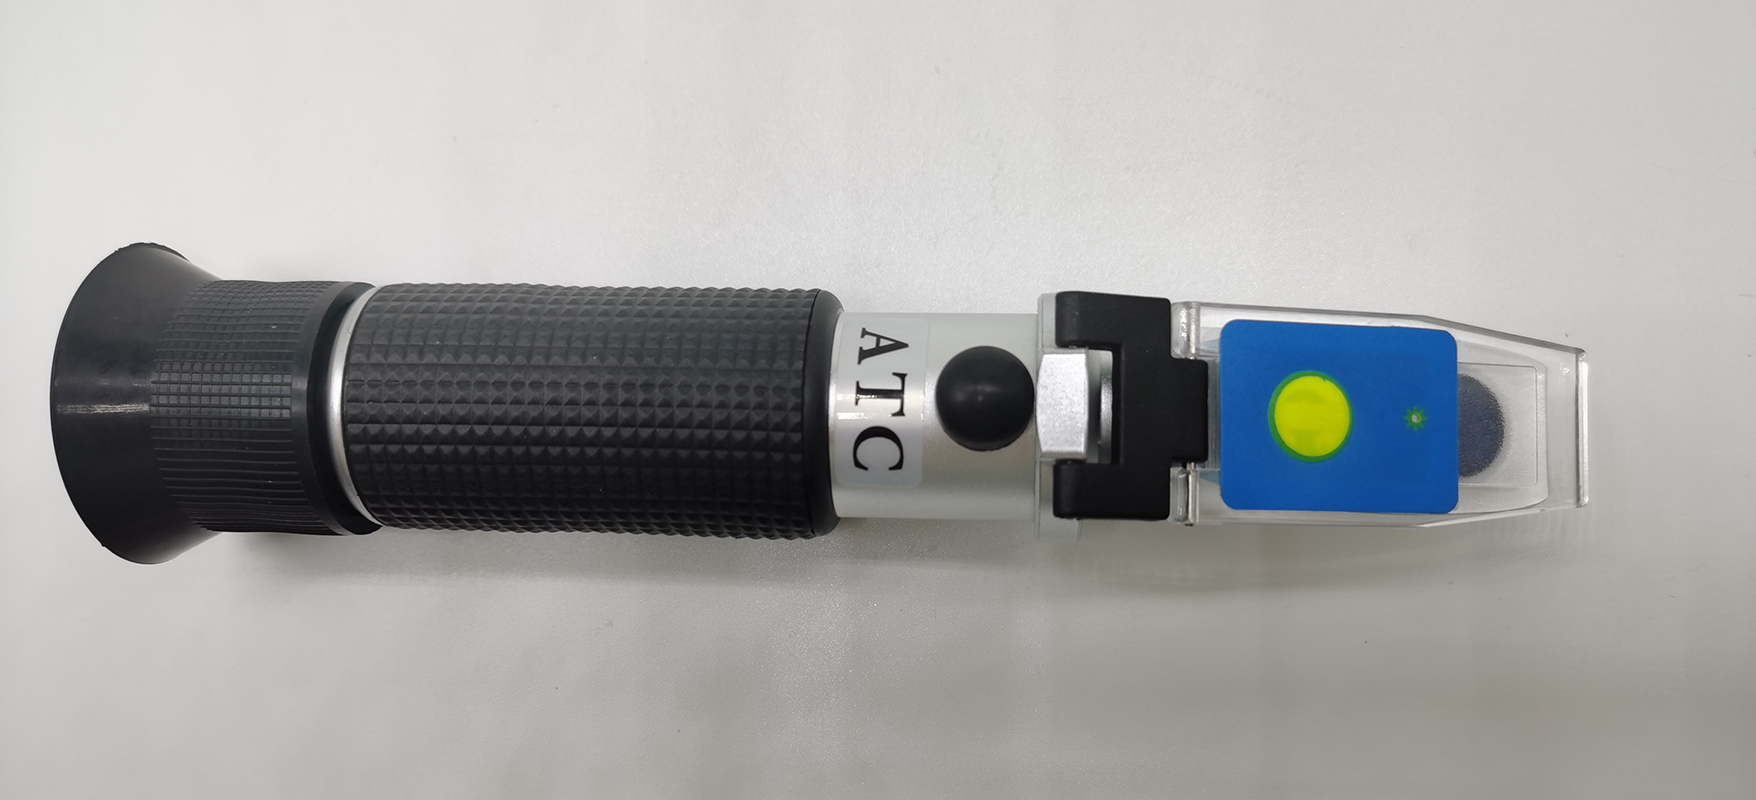 LED light 0-32% Brix and Cutting fluid Refractometer